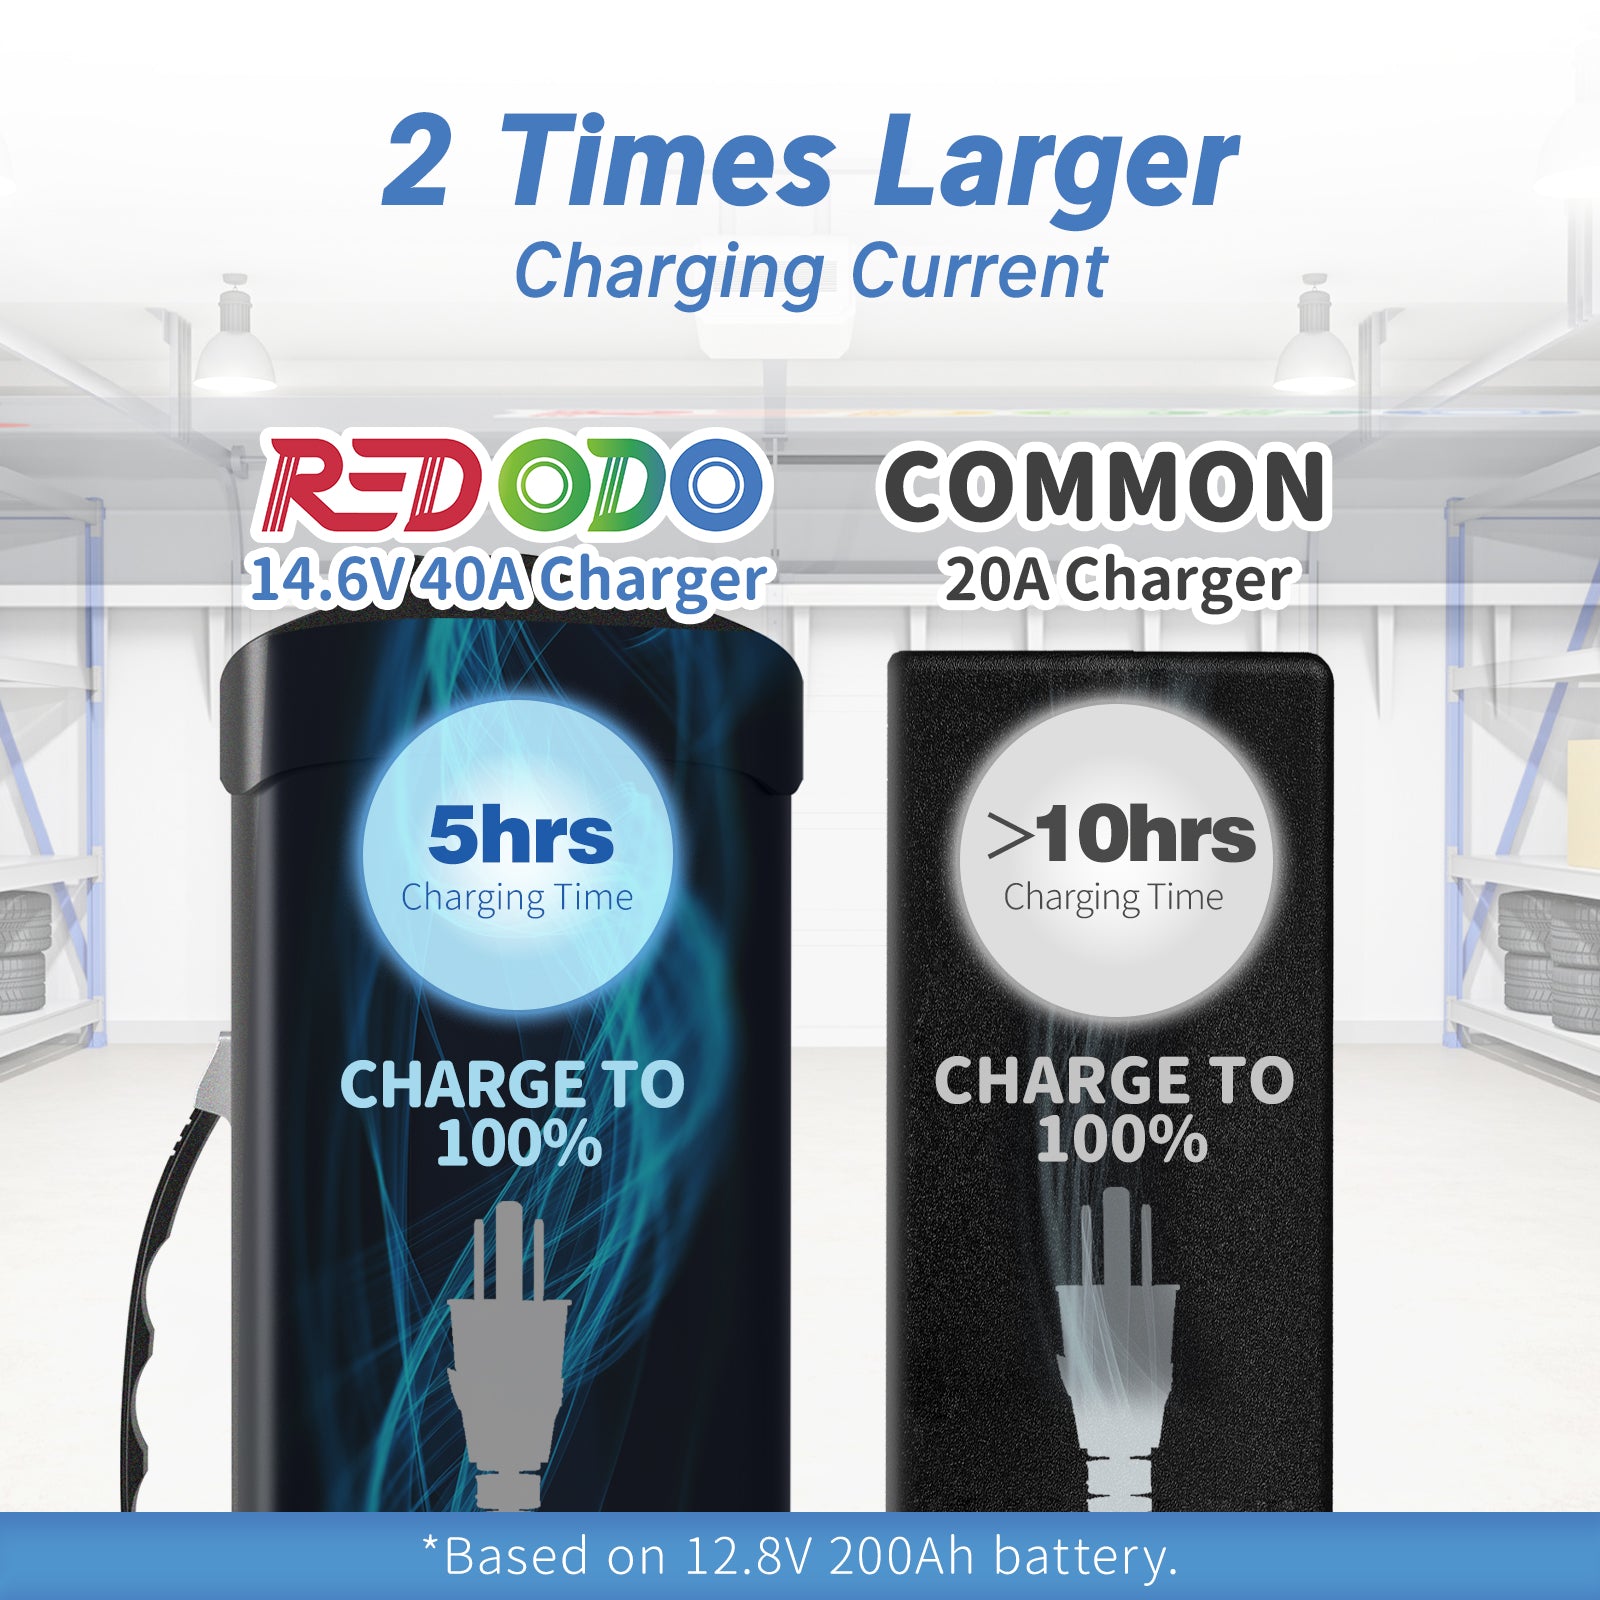 New Arrival- Redodo 14.6V 40A Handle LiFePO4 Battery Charger-Final price C$197.99